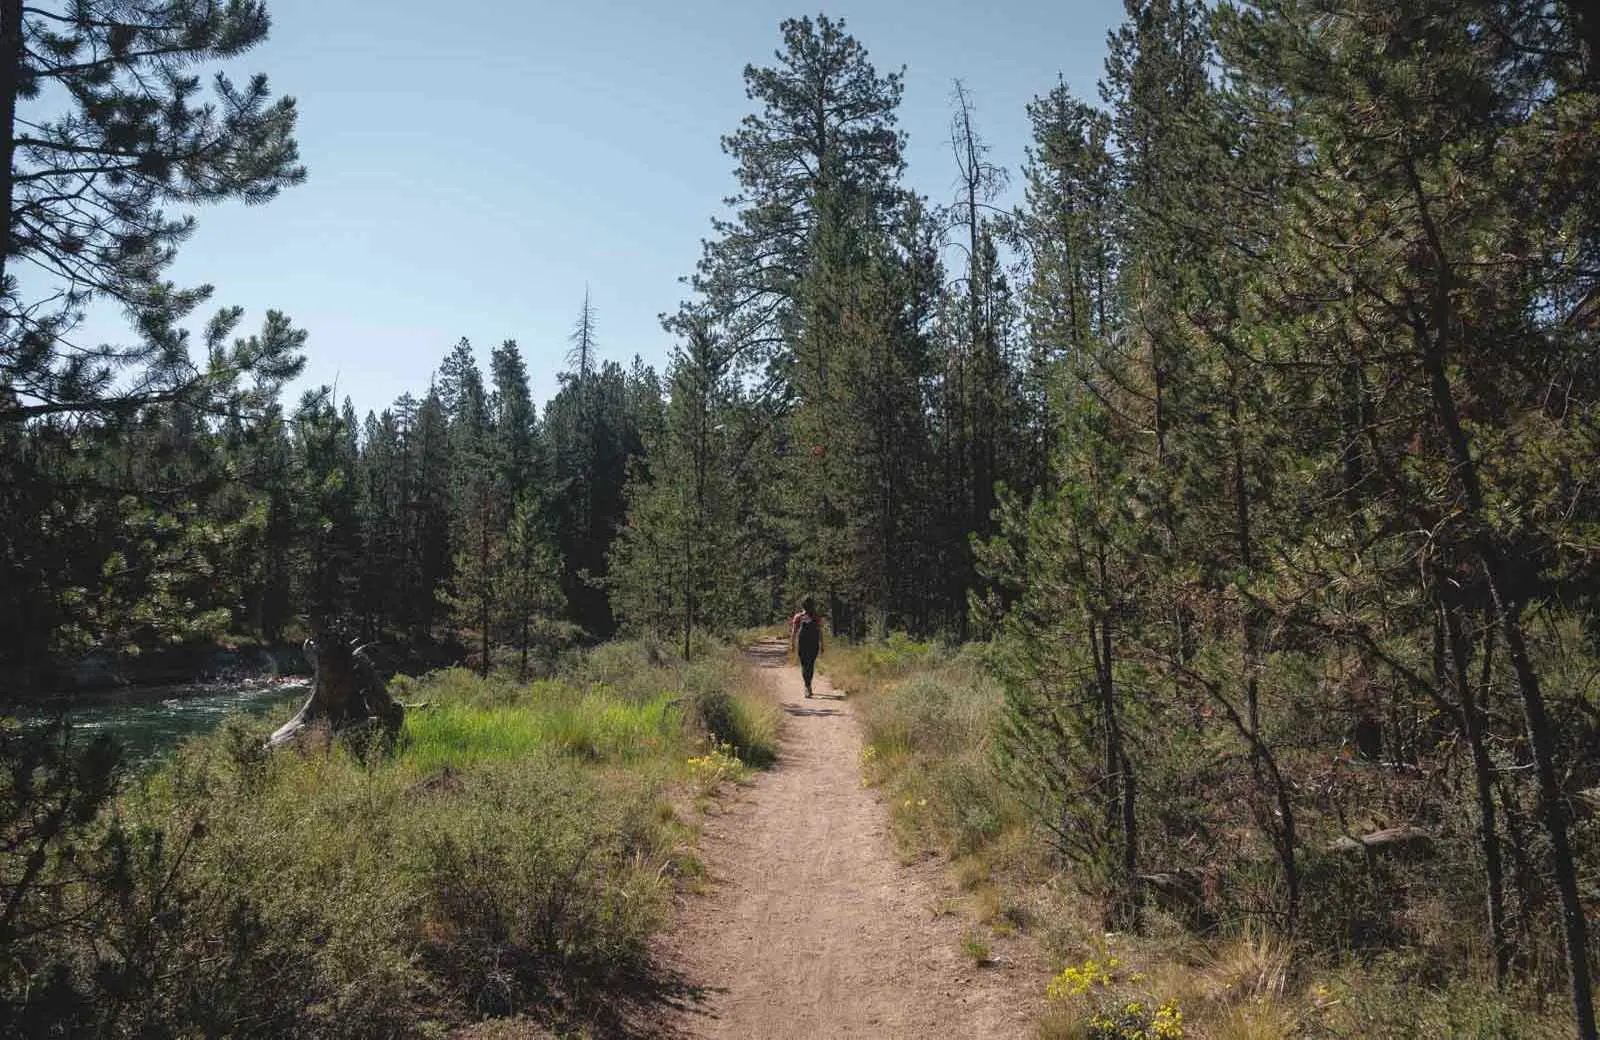 The hiking trails at LaPine State Park are fun and beautiful!